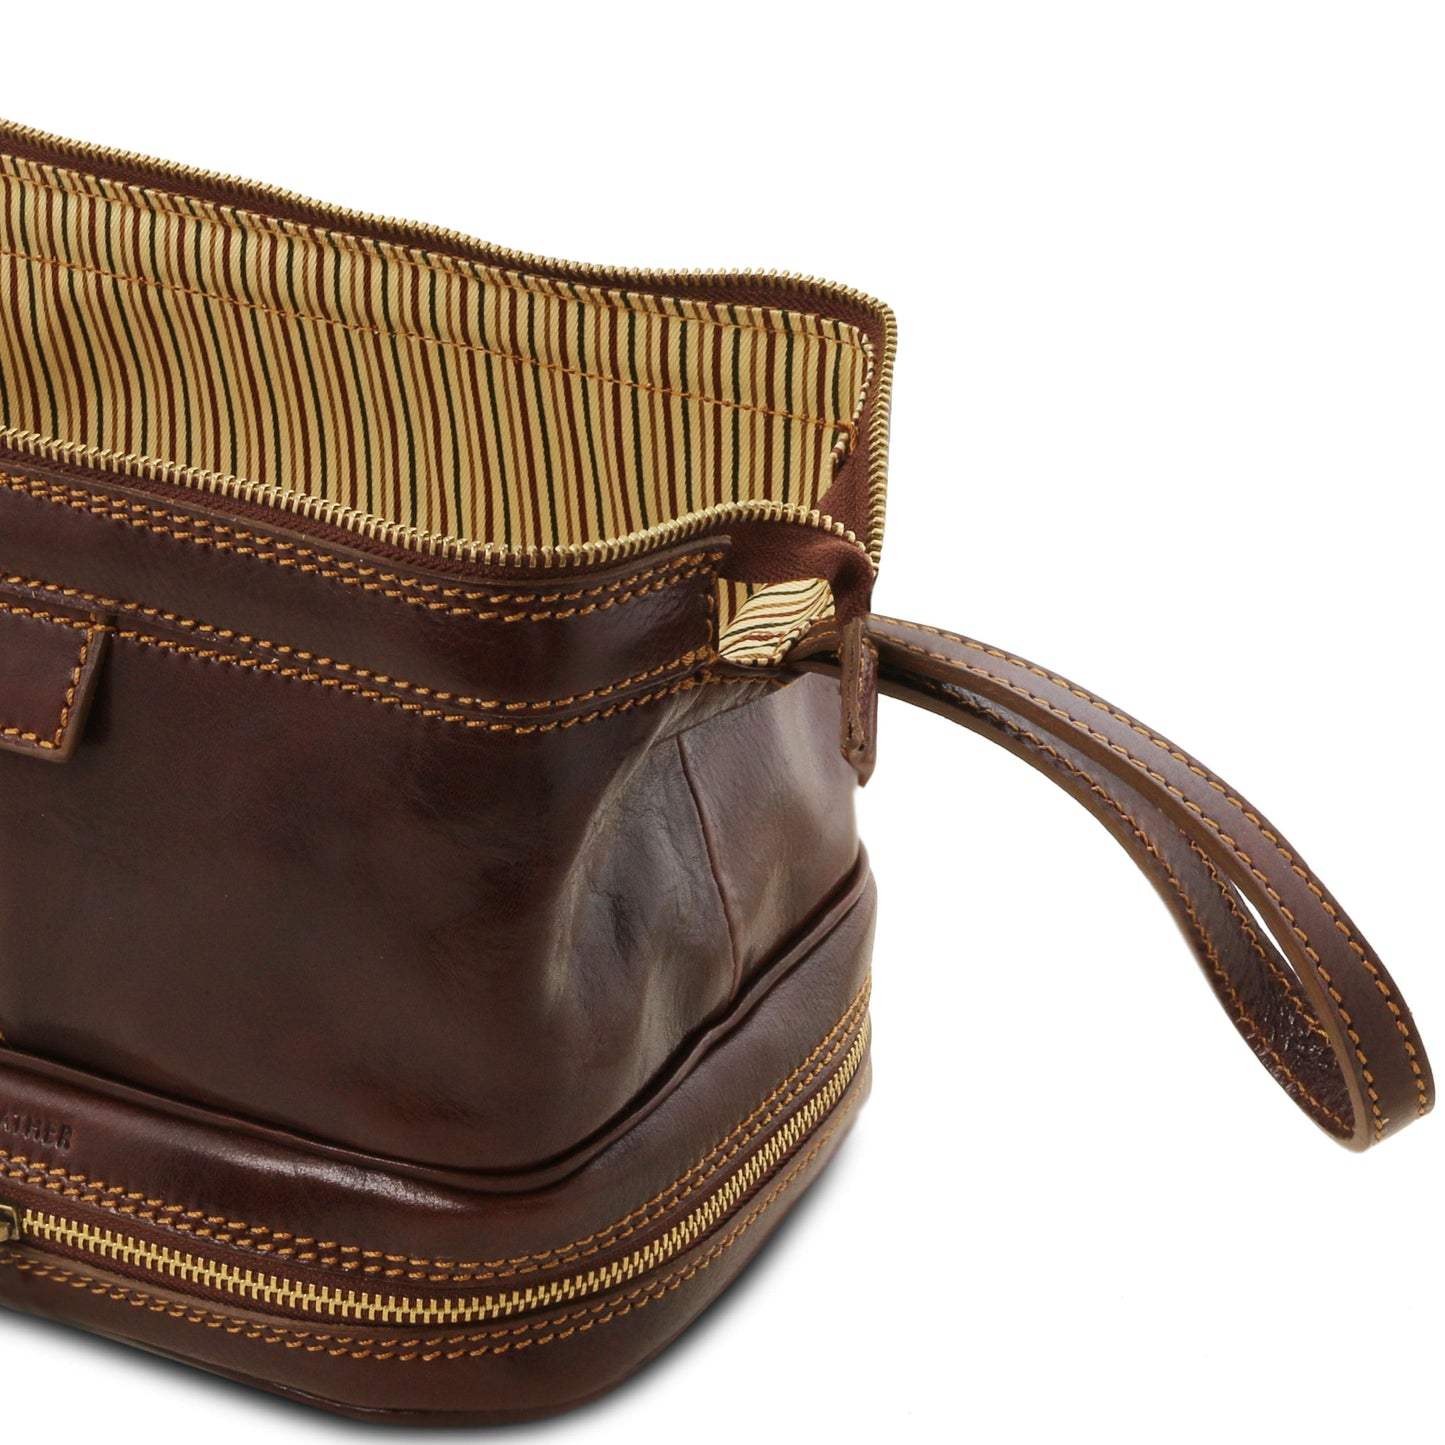 Patrick - Leather toiletry bag | TL141717 - Premium Travel leather accessories - Shop now at San Rocco Italia